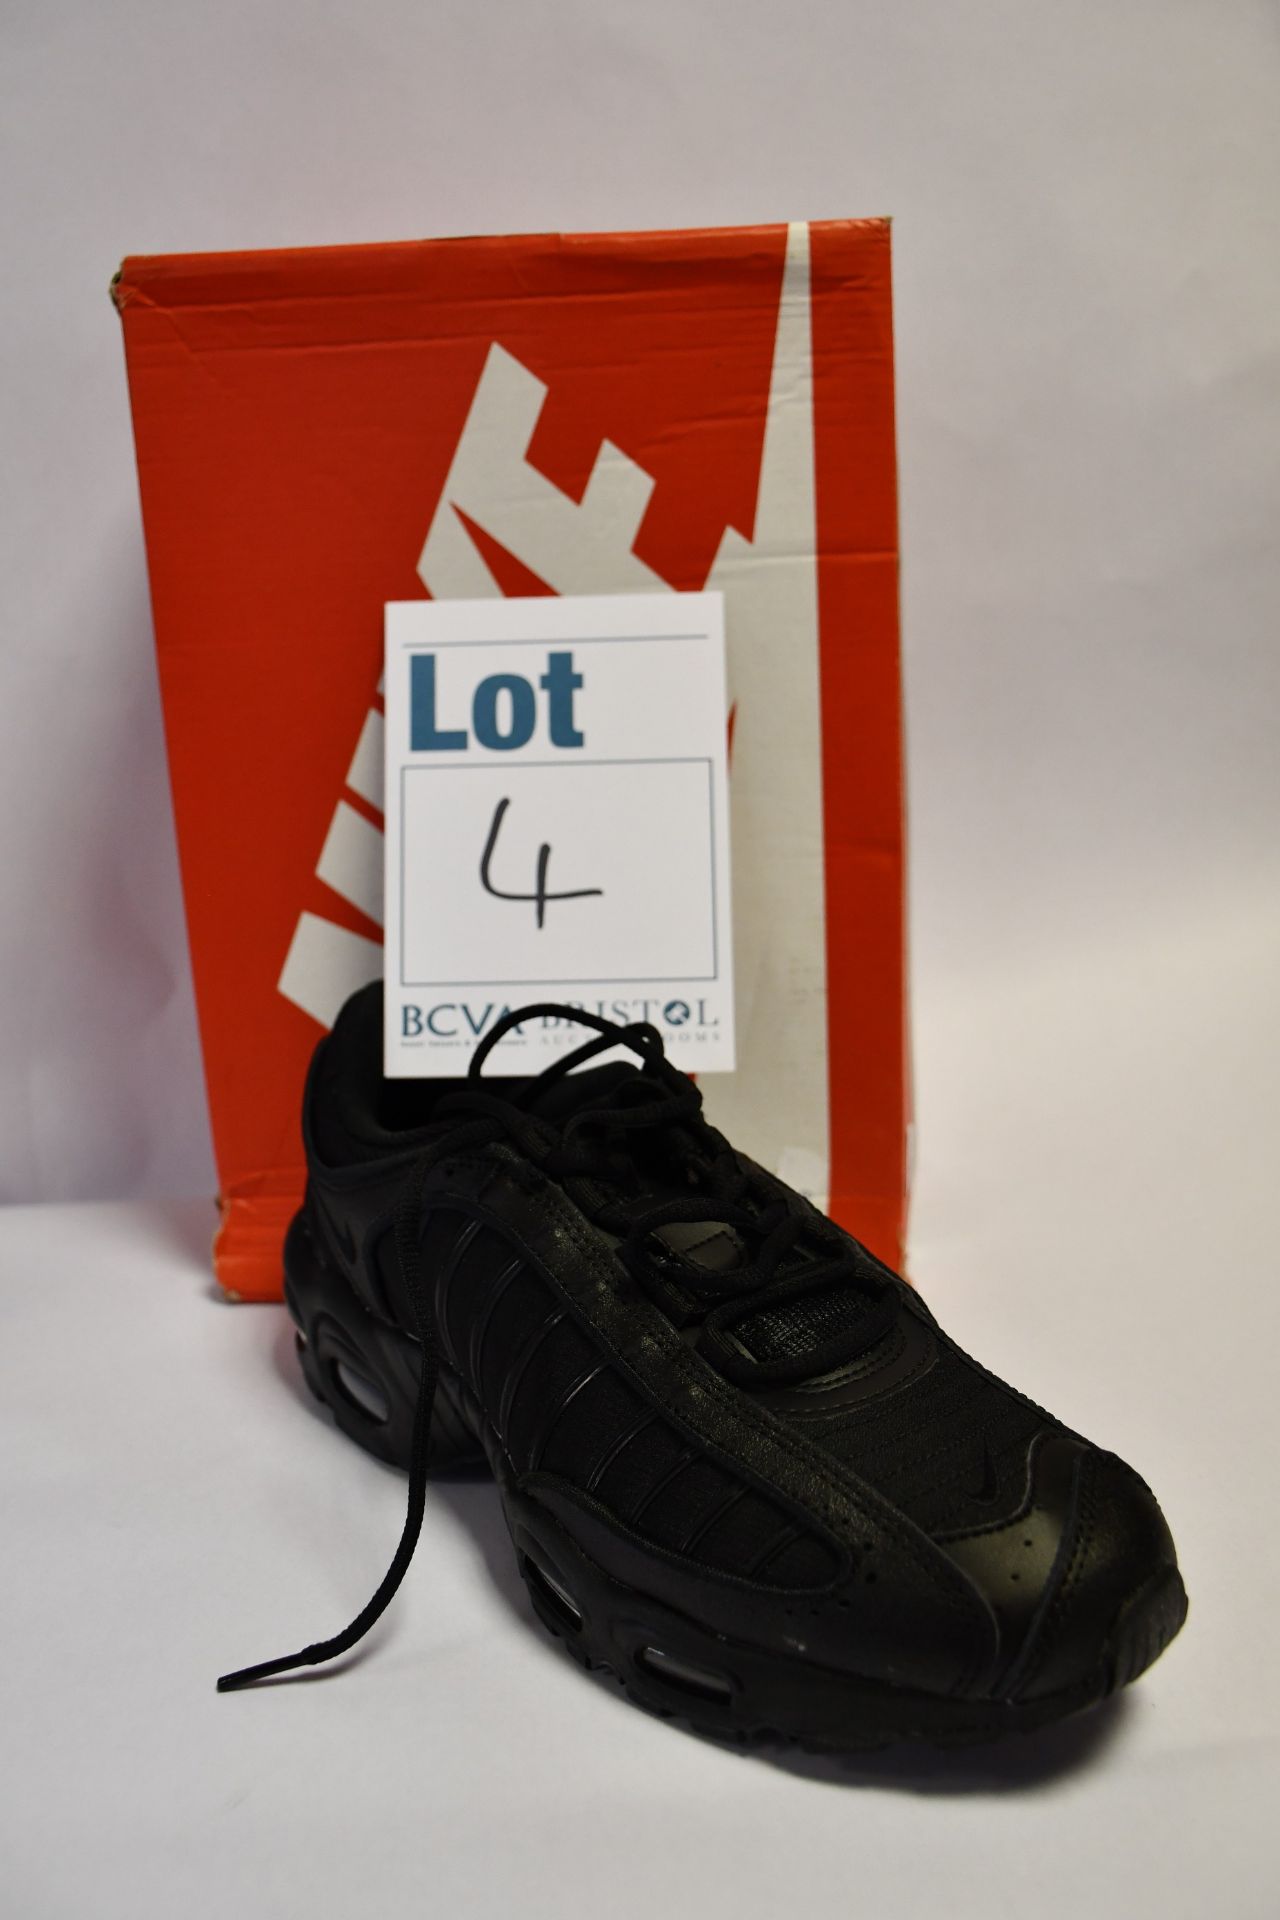 A pair of as new Nike Air Max Tailwind IV trainers (UK 9).